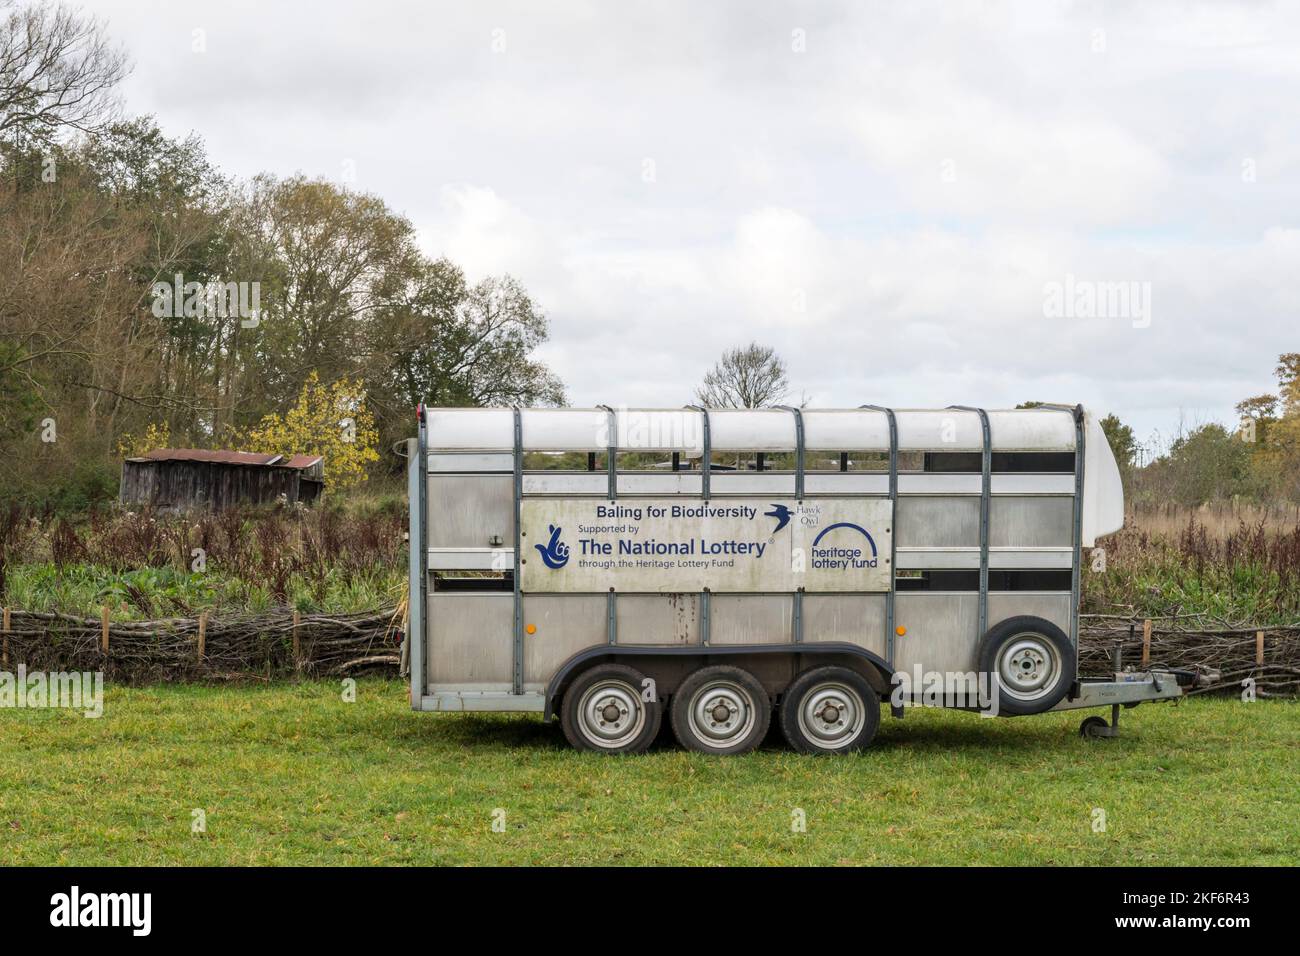 Sign on a trailer at the Hawk & Owl Trust nature reserve at Sculthorpe Moor reads Baling for Biodiversity supported by The National Lottery. Stock Photo